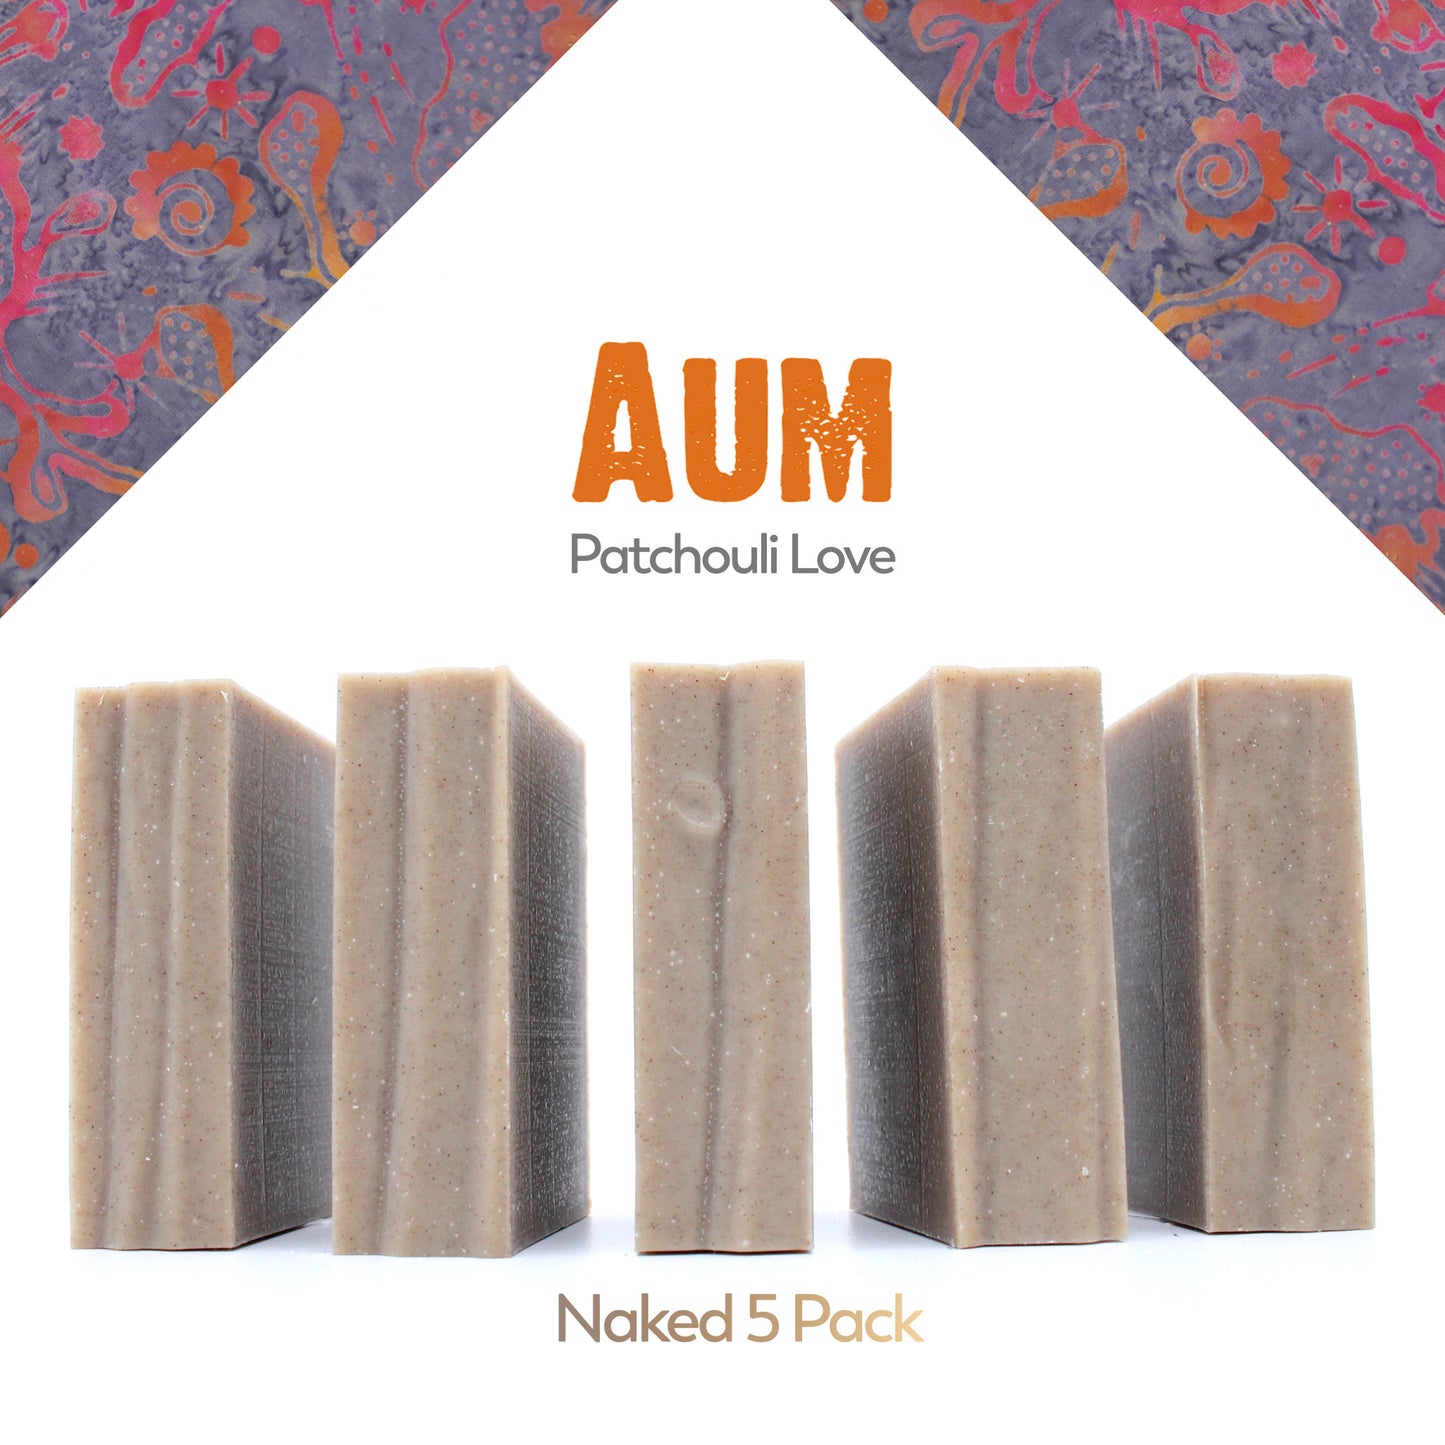 A naked five pack of unpackaged Aum Patchouli essential oil organic bar soap from Ground Soap.